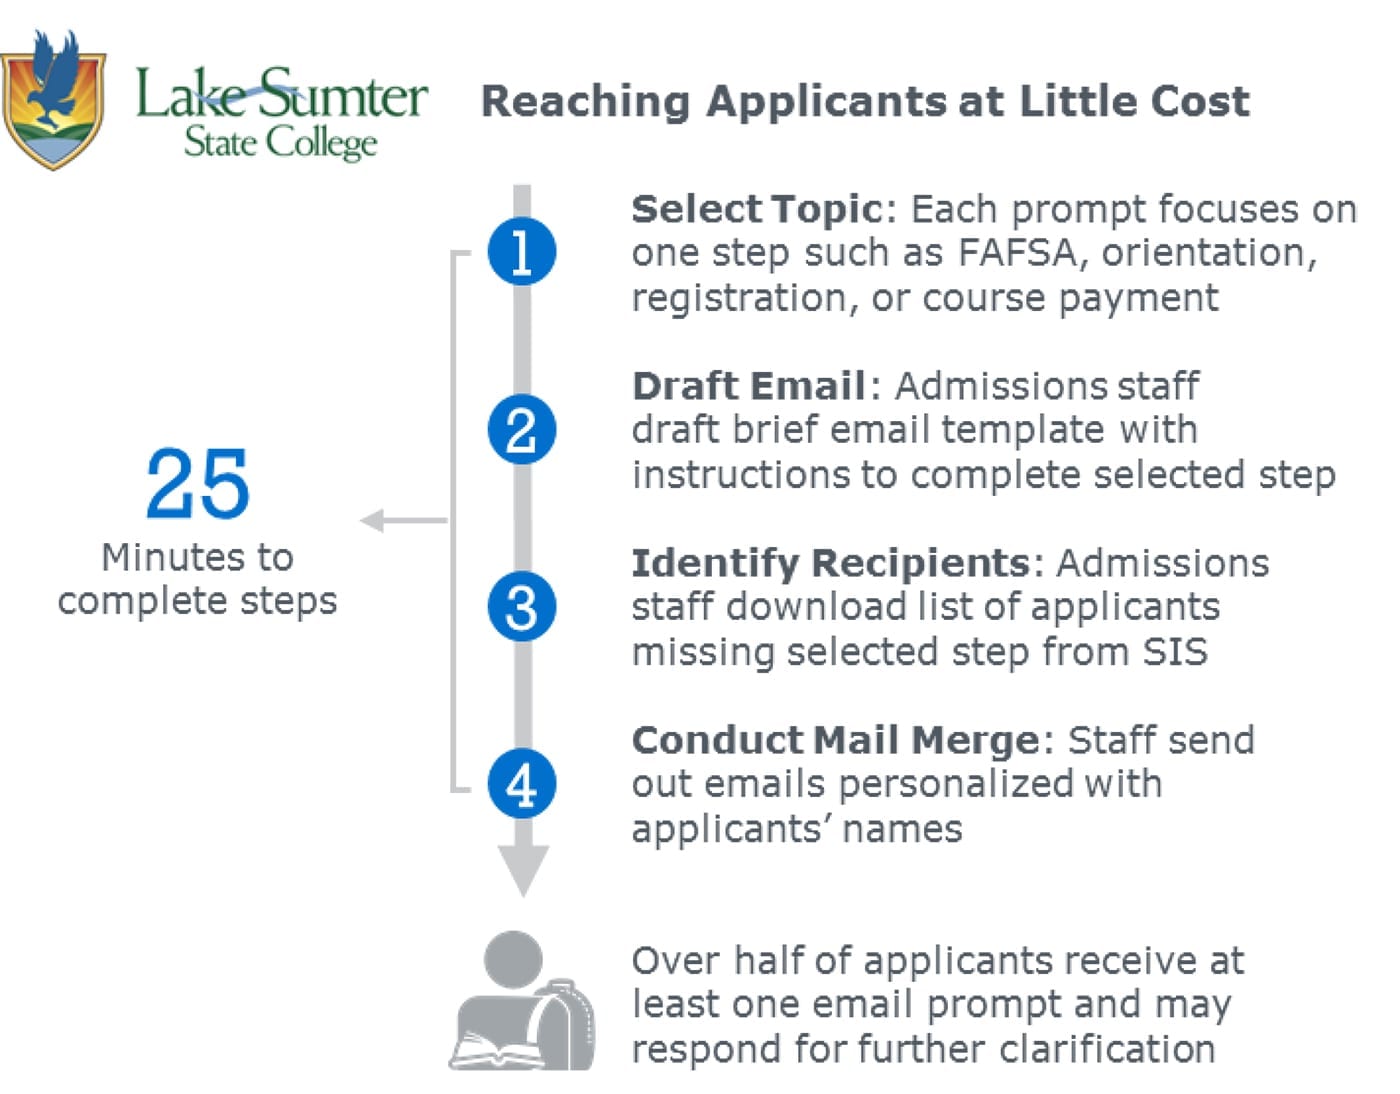 Reaching applicants at little cost